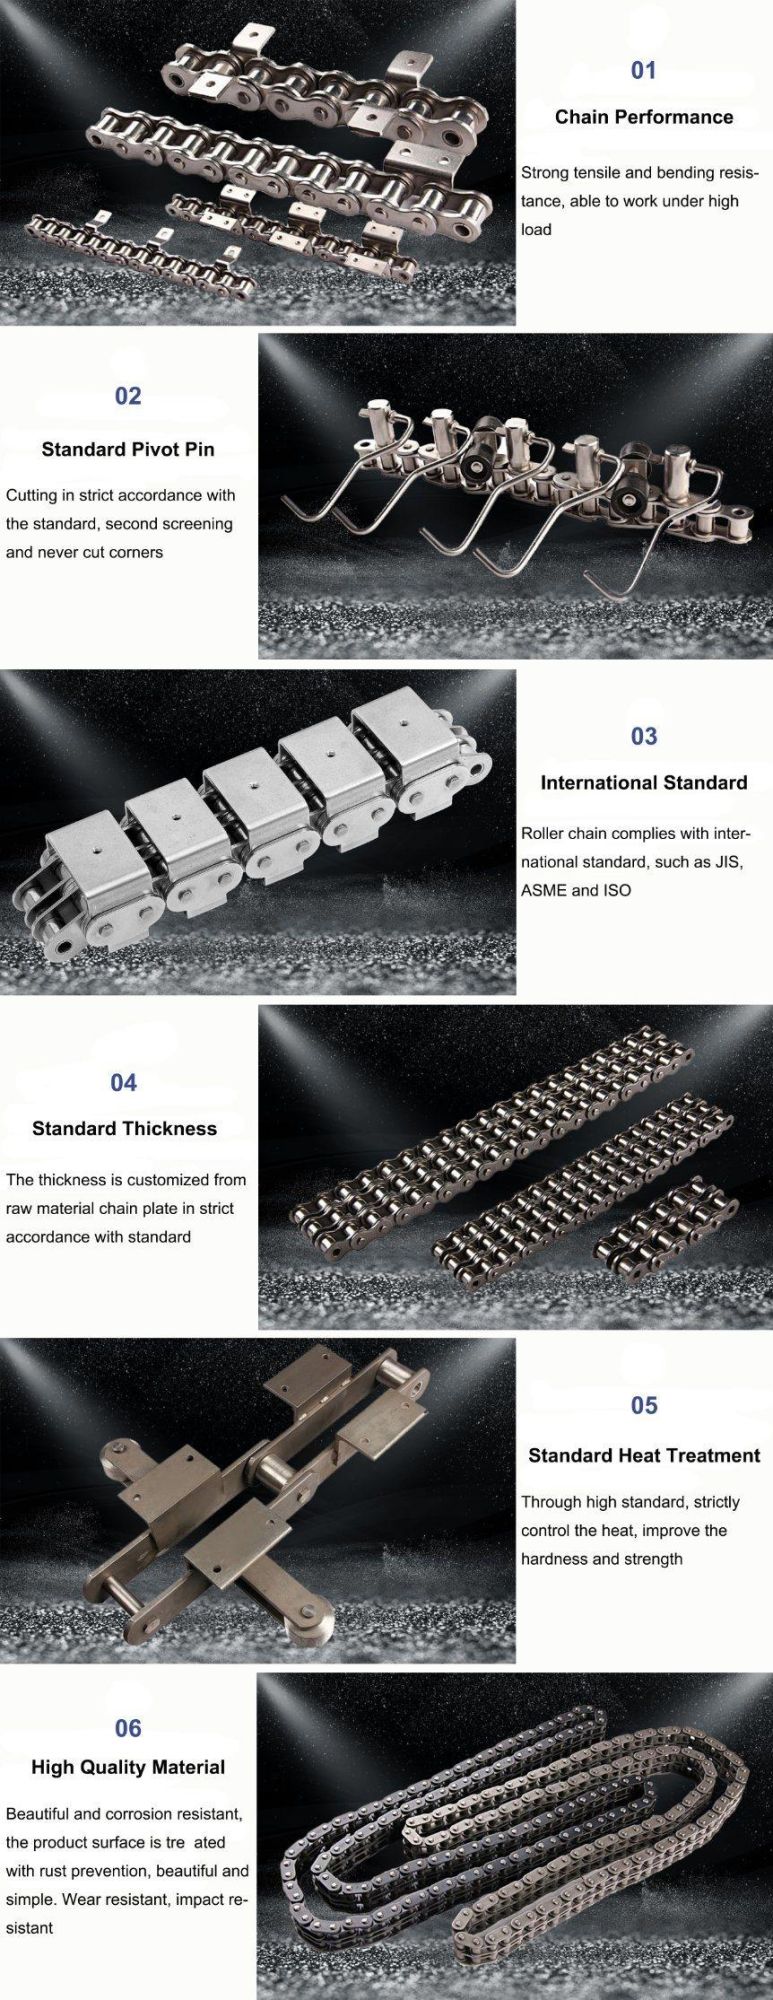 Wholesale Welded Straight Sidebar Chain Welded Steel Conveyor Roller Chain with Attachments